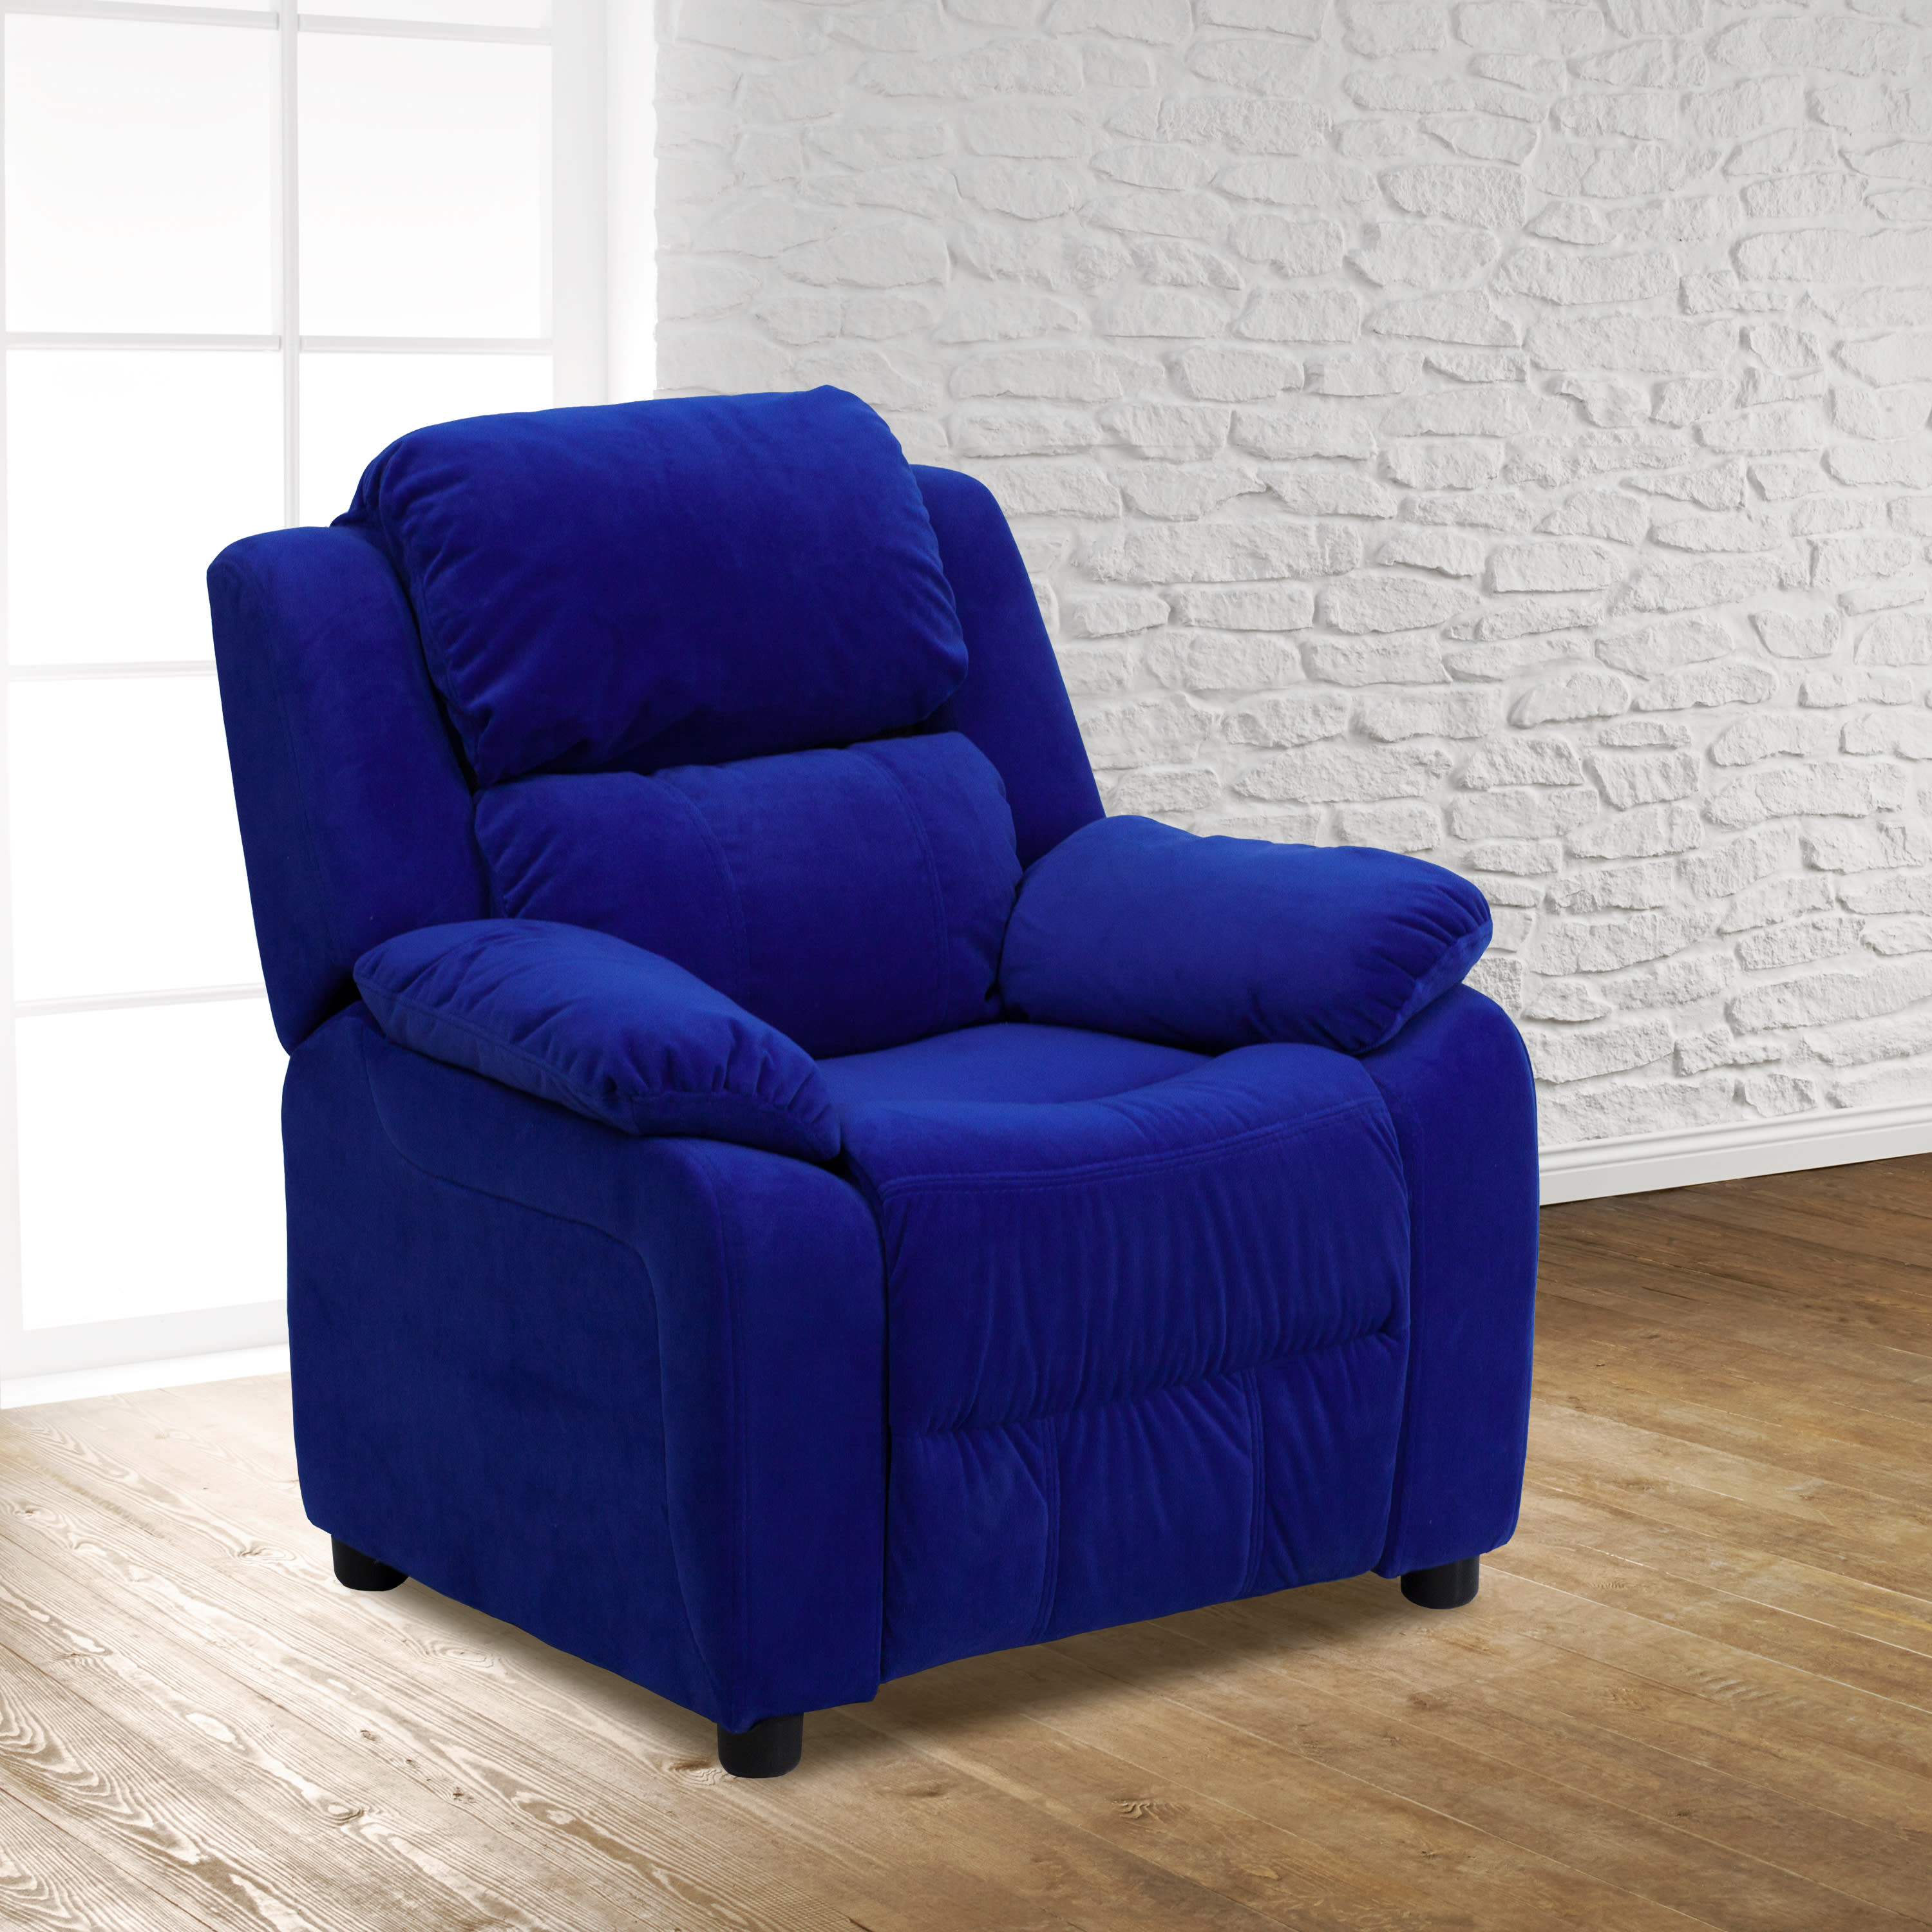 Flash Furniture Deluxe Padded Contemporary Blue Microfiber Kids Recliner with Storage Arms - image 1 of 13